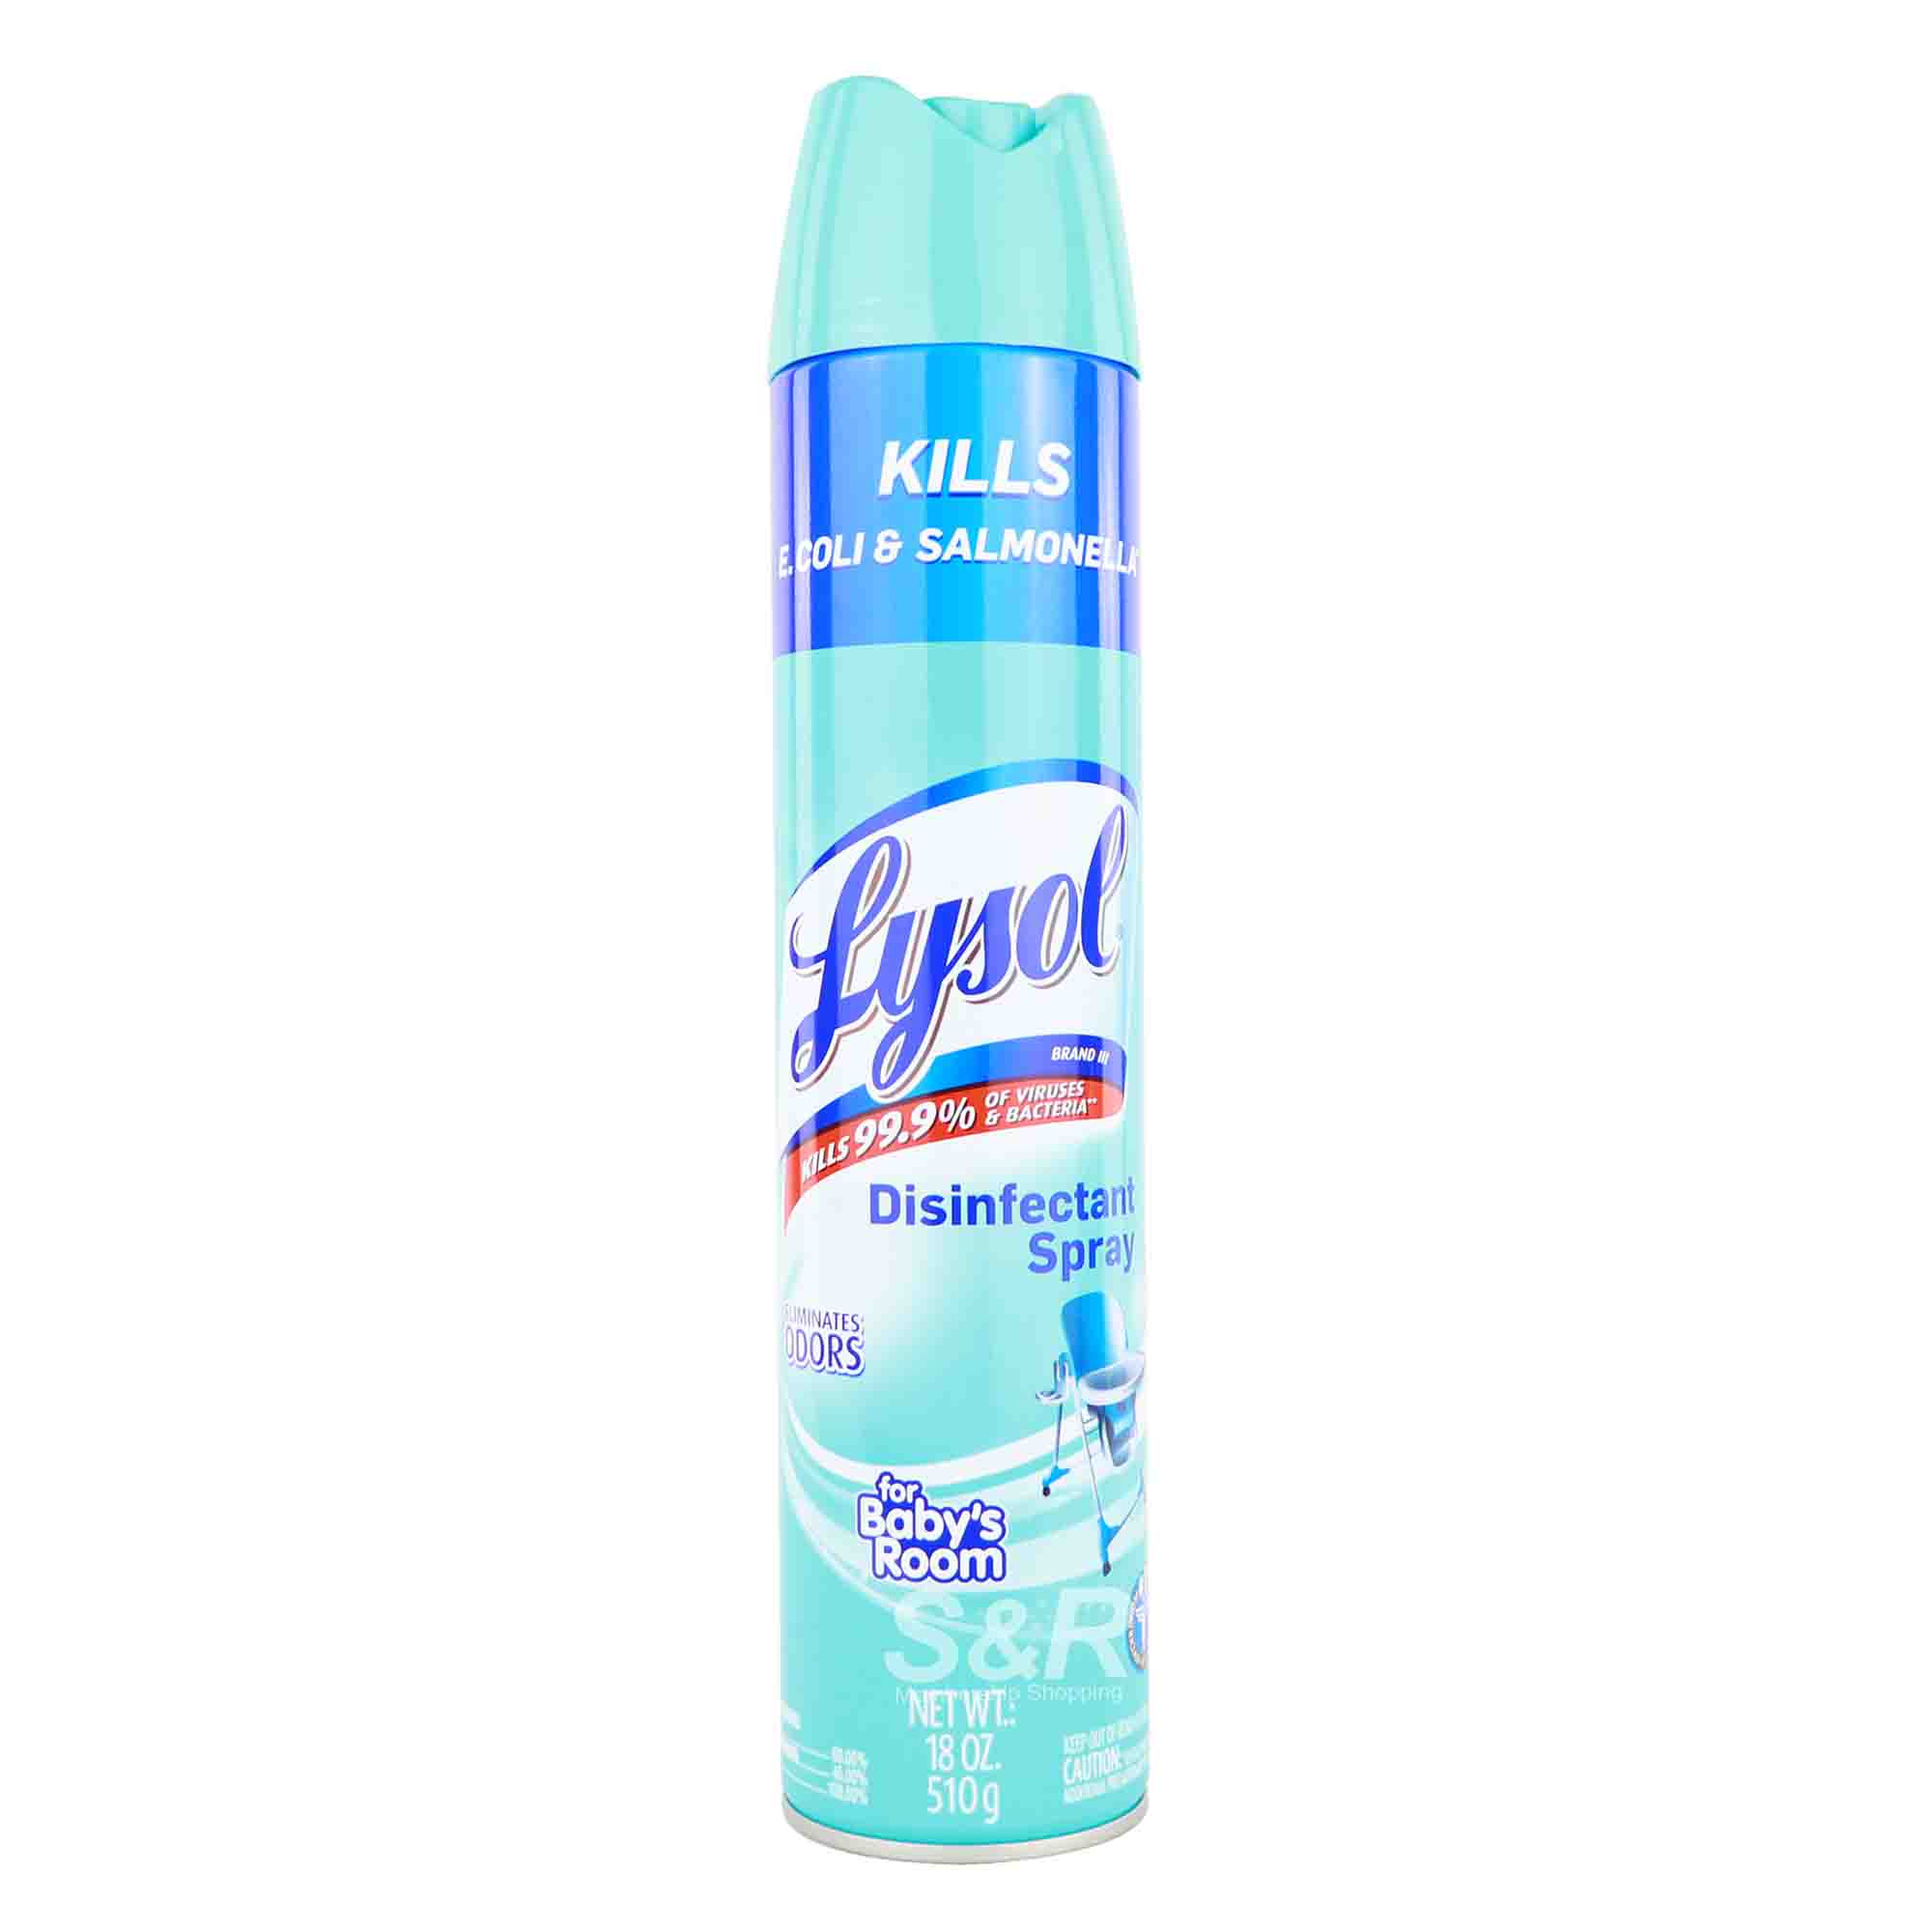 Lysol For Baby's Room 510g